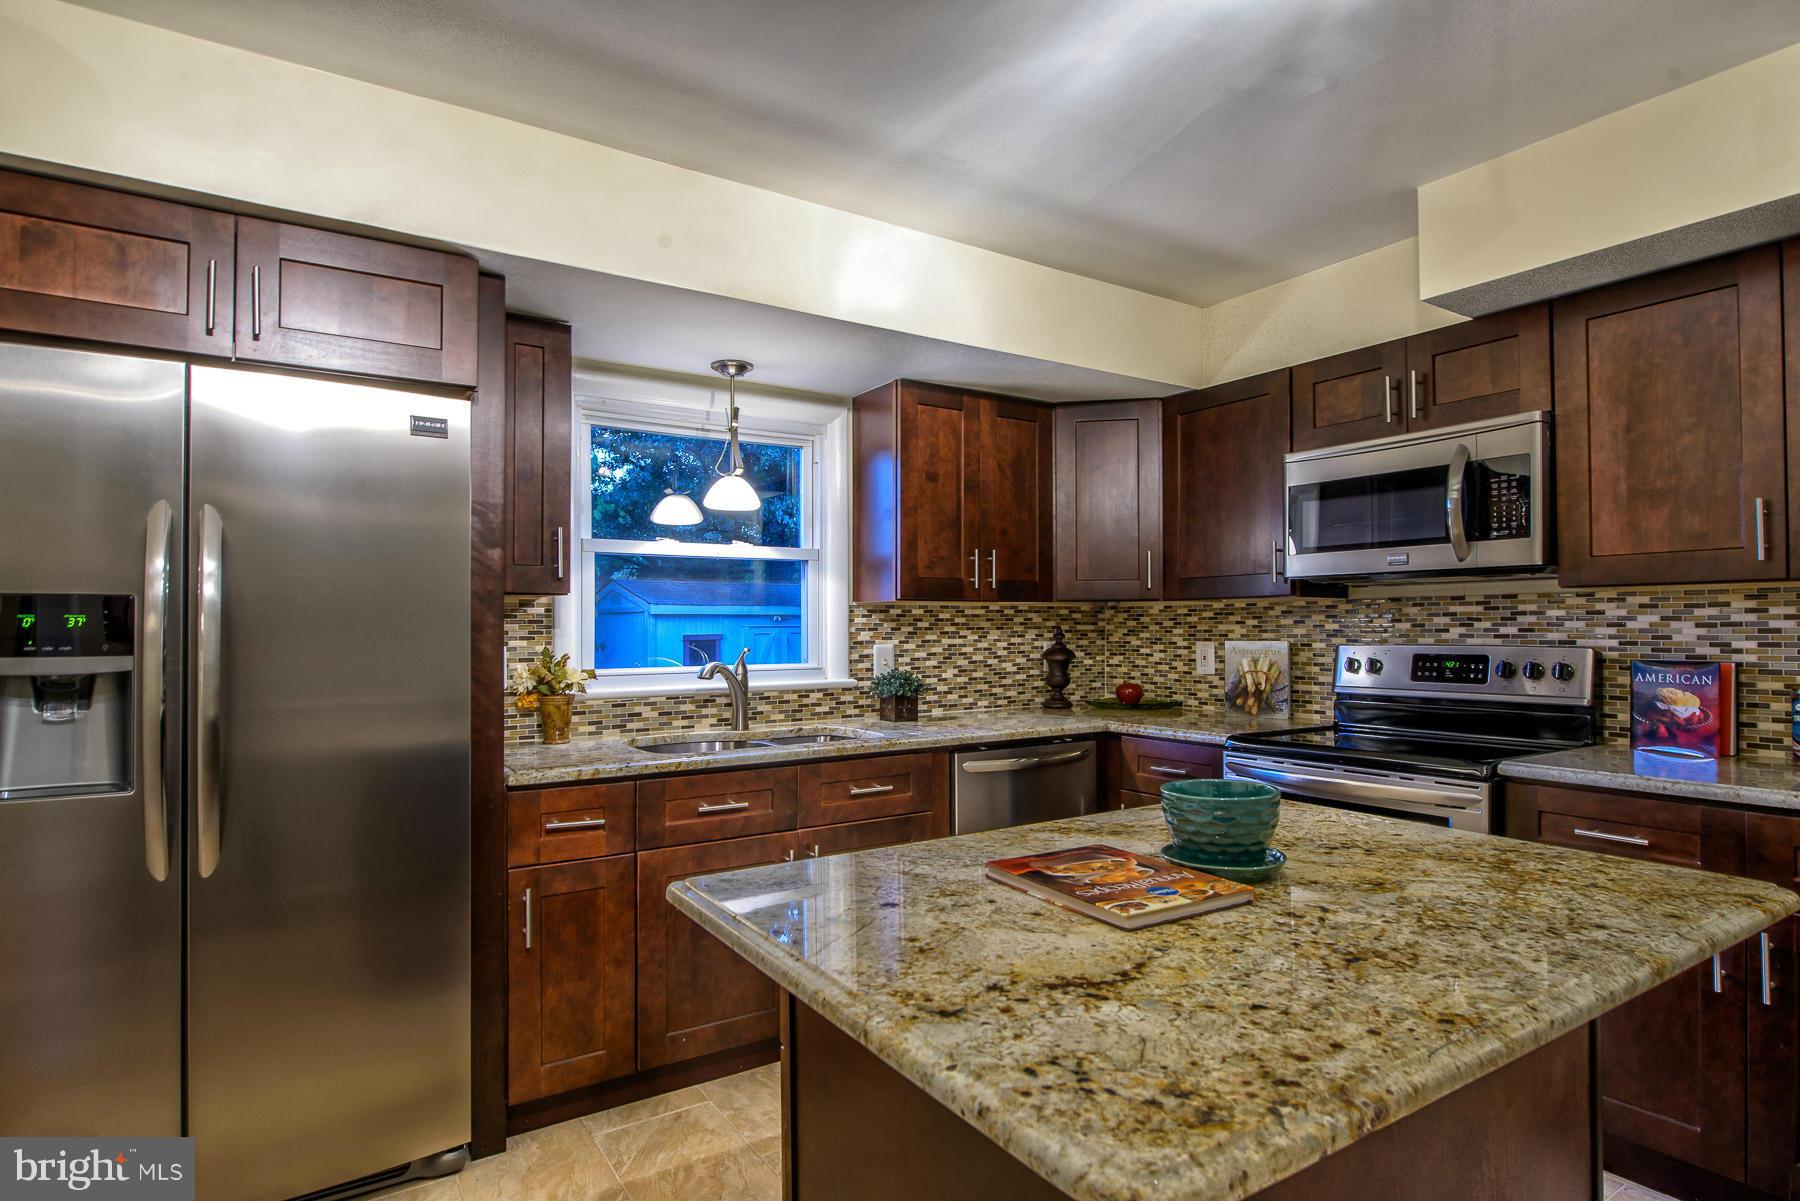 a kitchen with stainless steel appliances granite countertop a refrigerator oven a sink and dishwasher